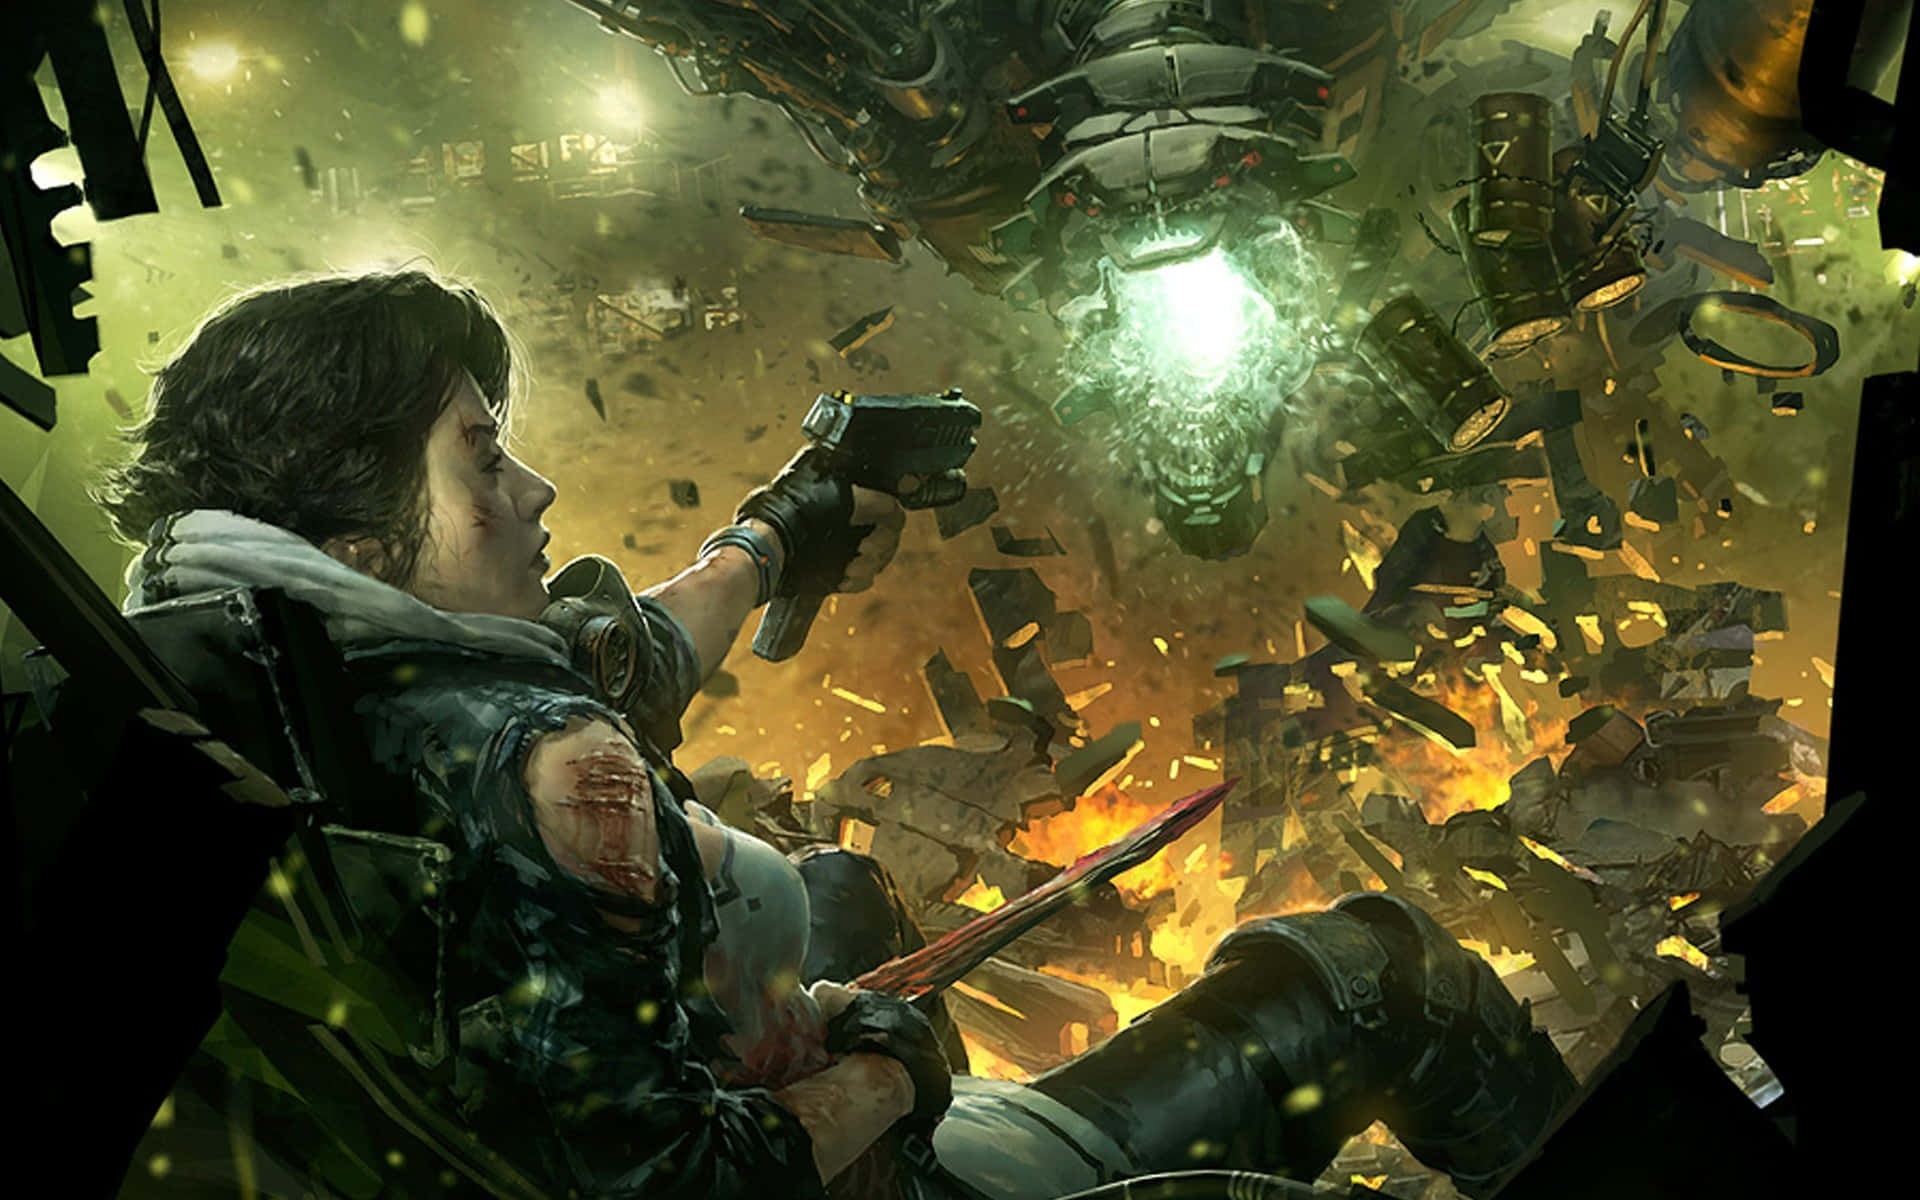 Experience a whole new world of technology and magic with Shadowrun Wallpaper